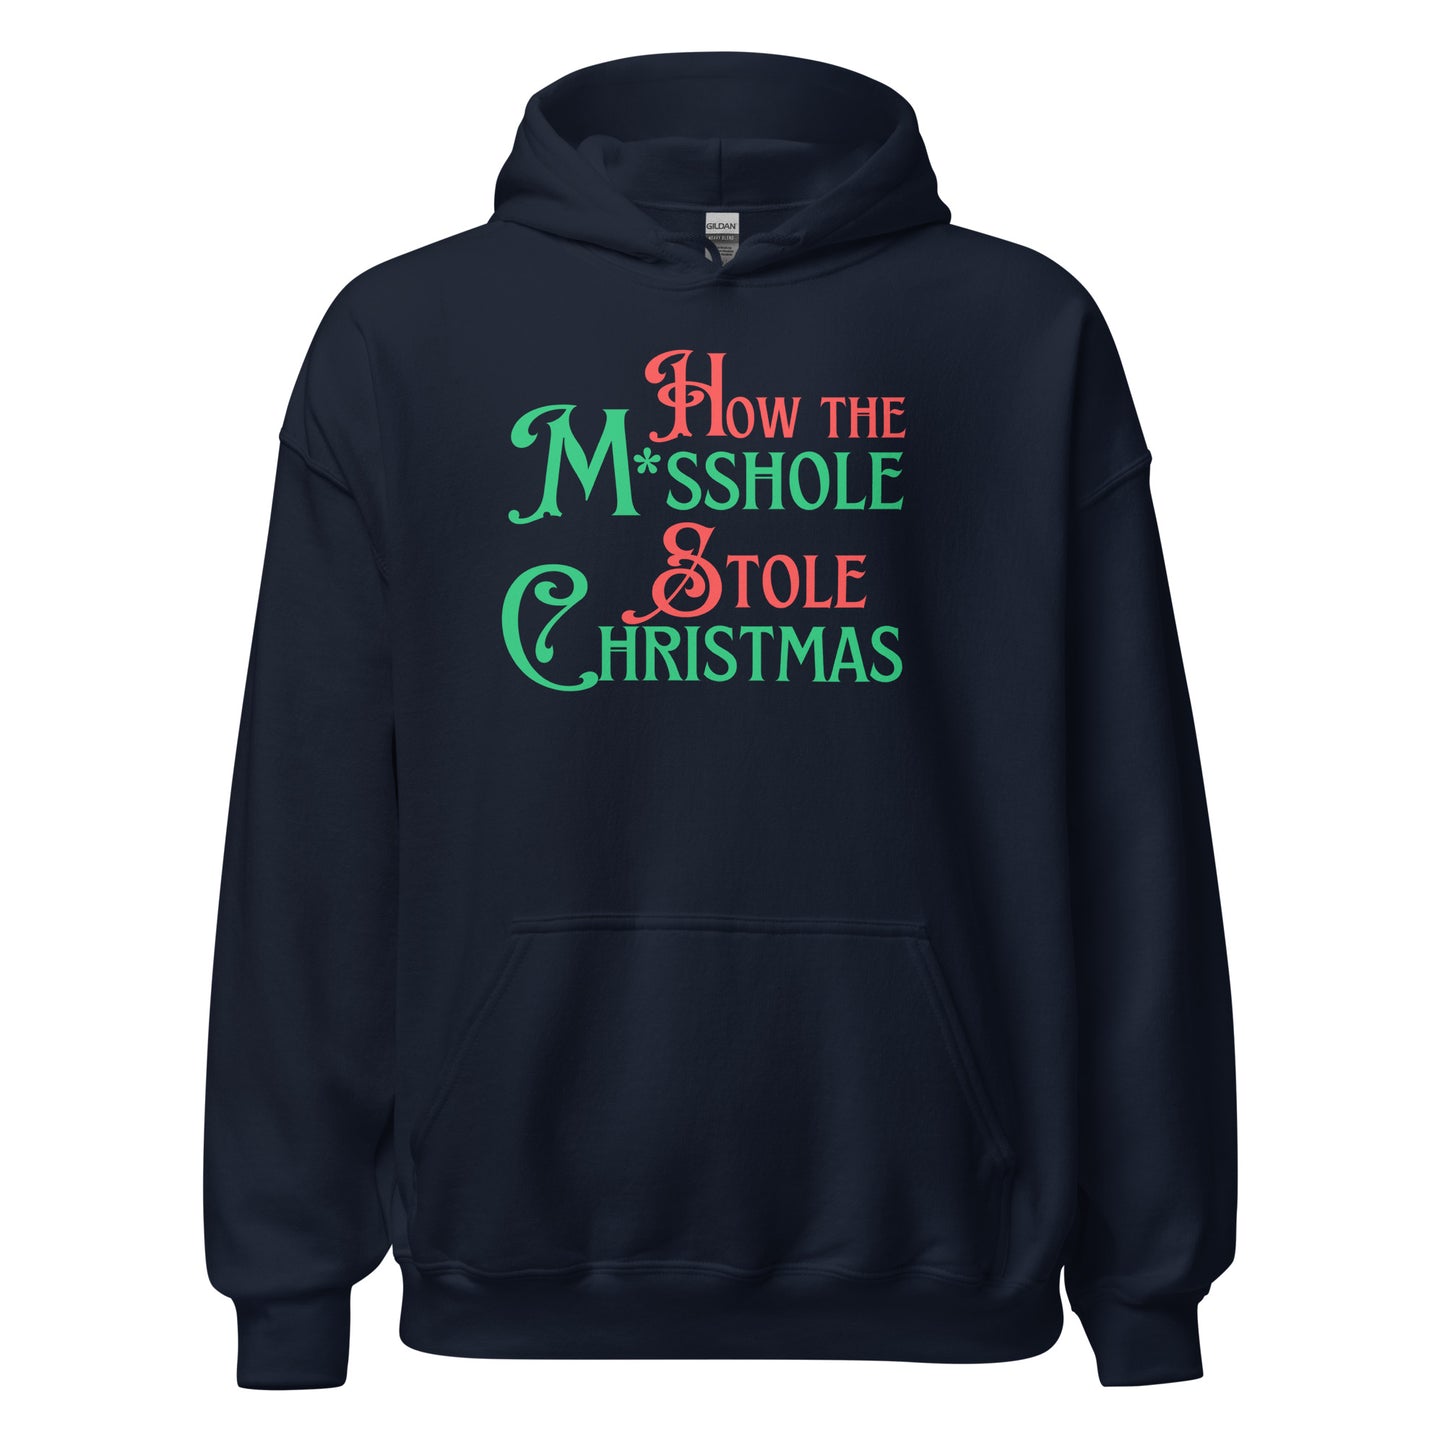 How the M*sshole Stole Christmas Hoodie